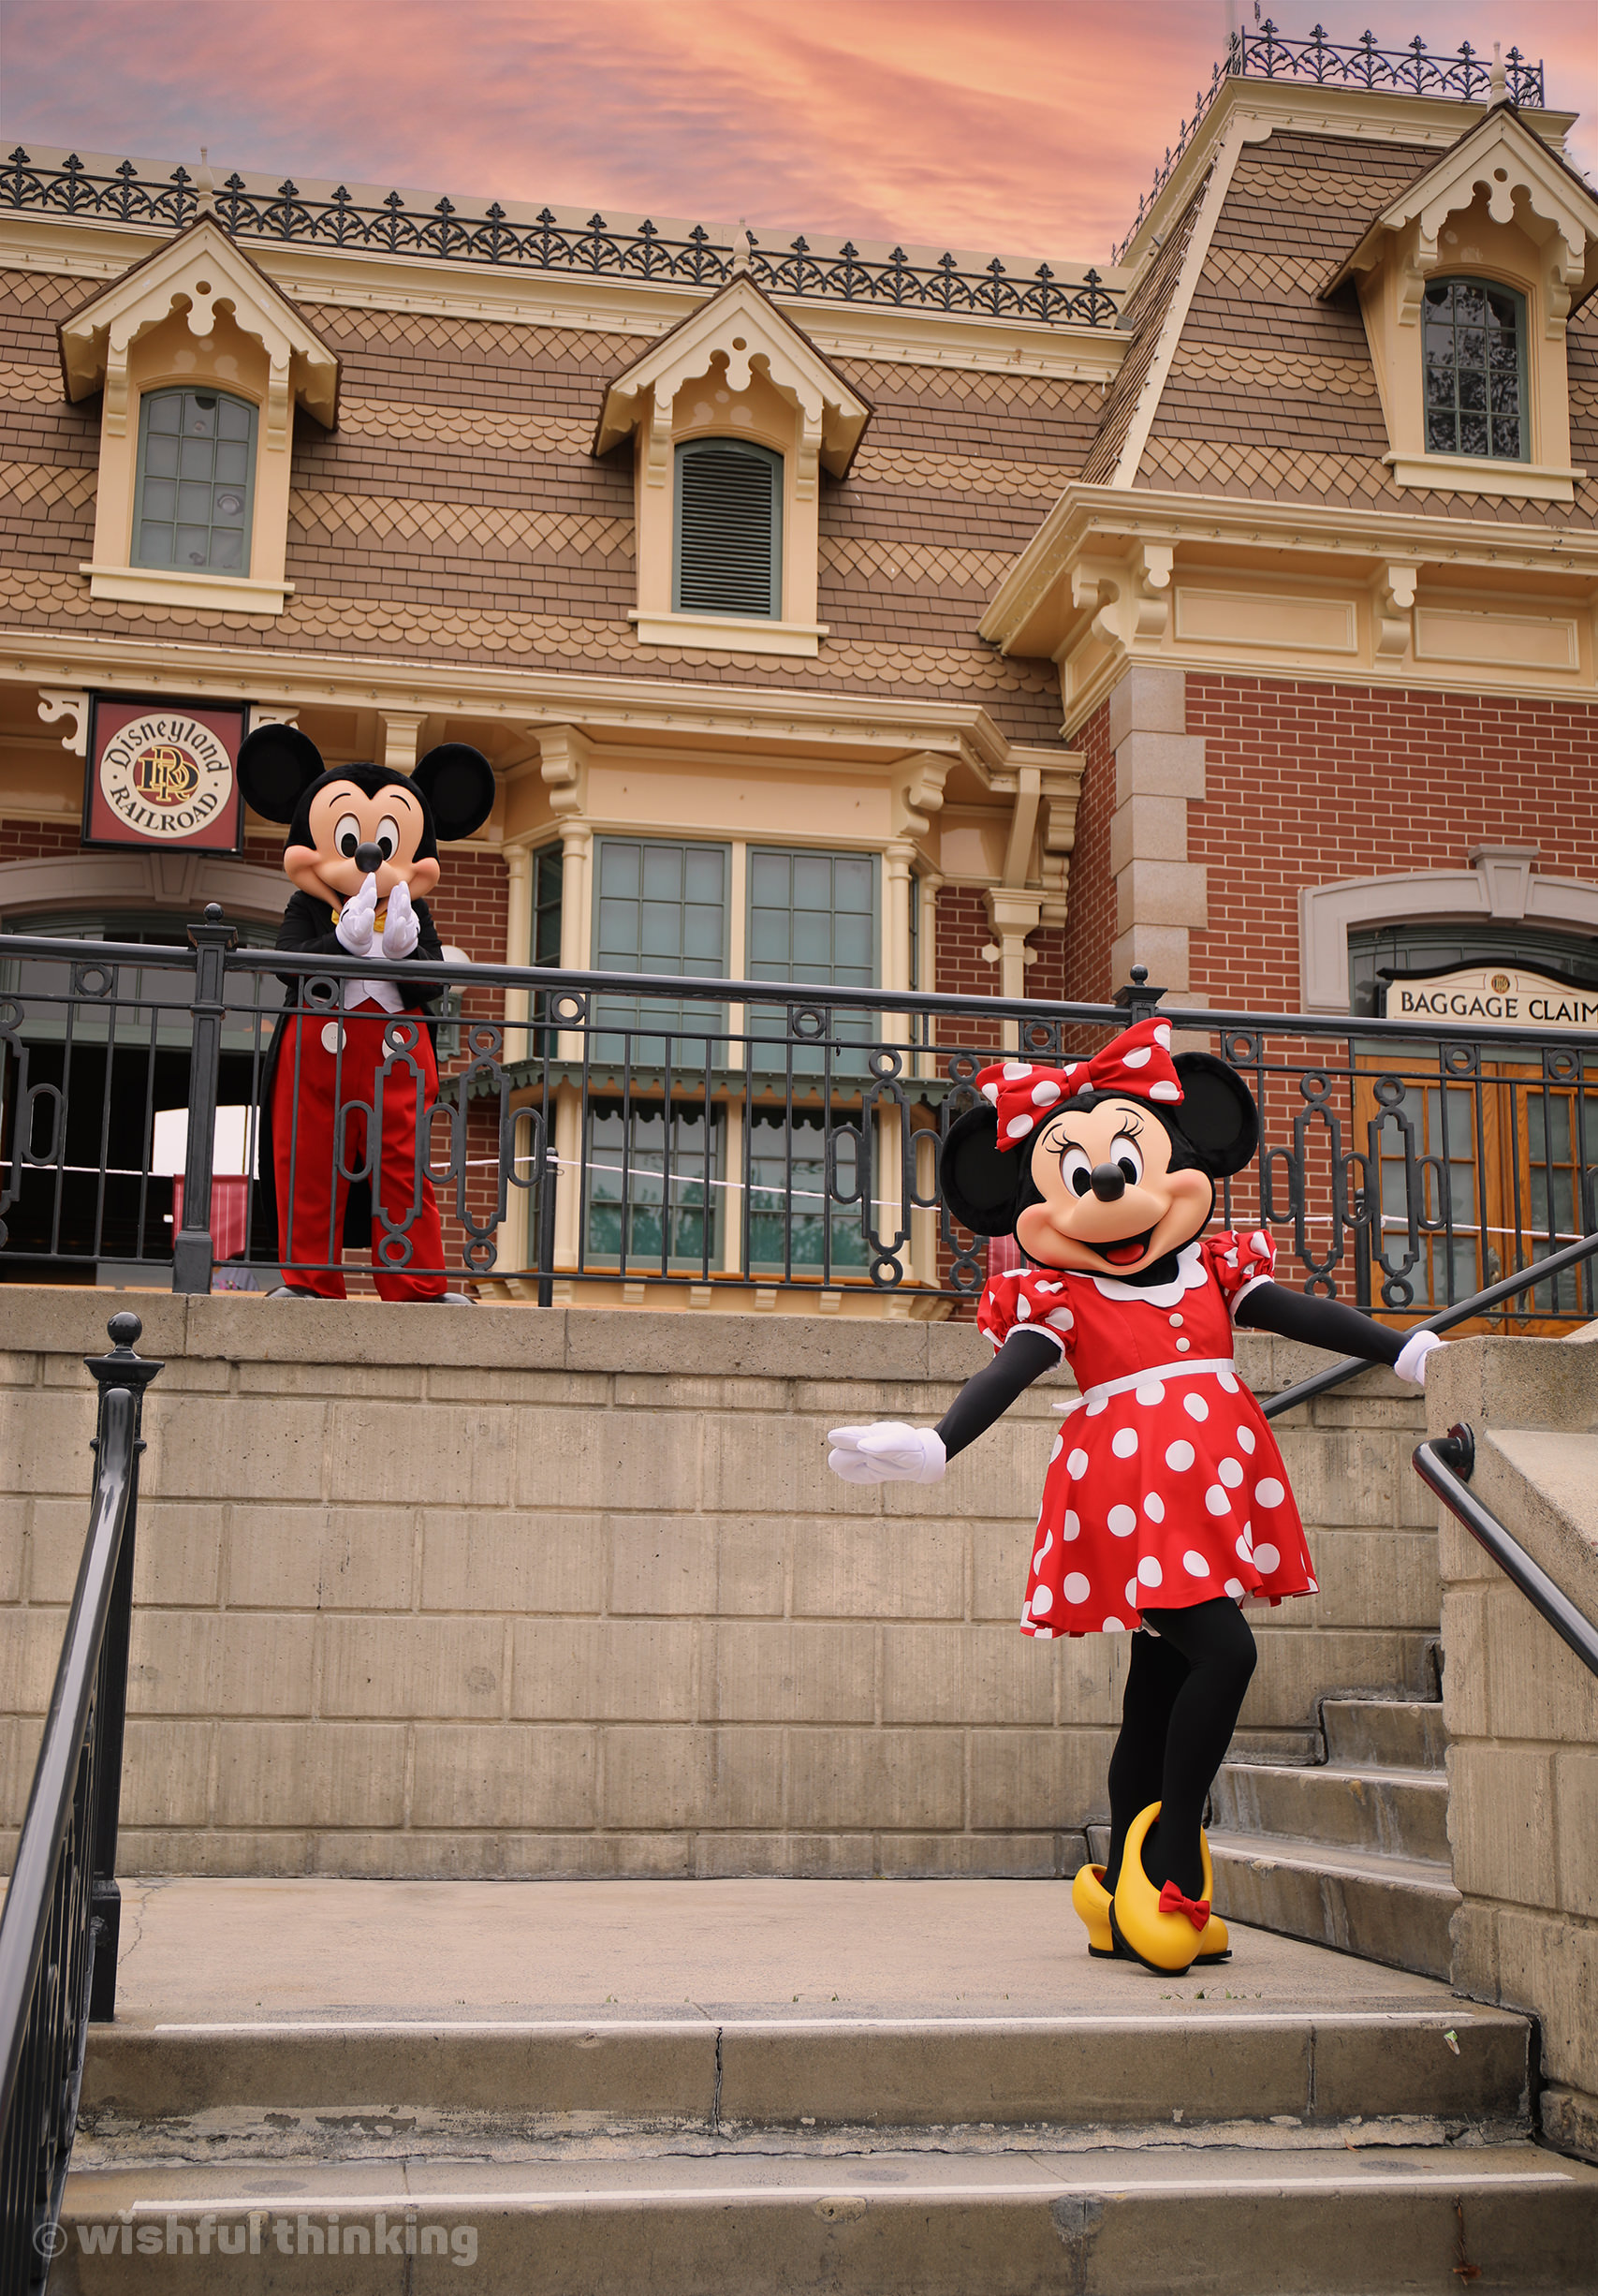 Mickey and Minnie rewelcome guests back to Disneyland Resort at its reopening in 2021